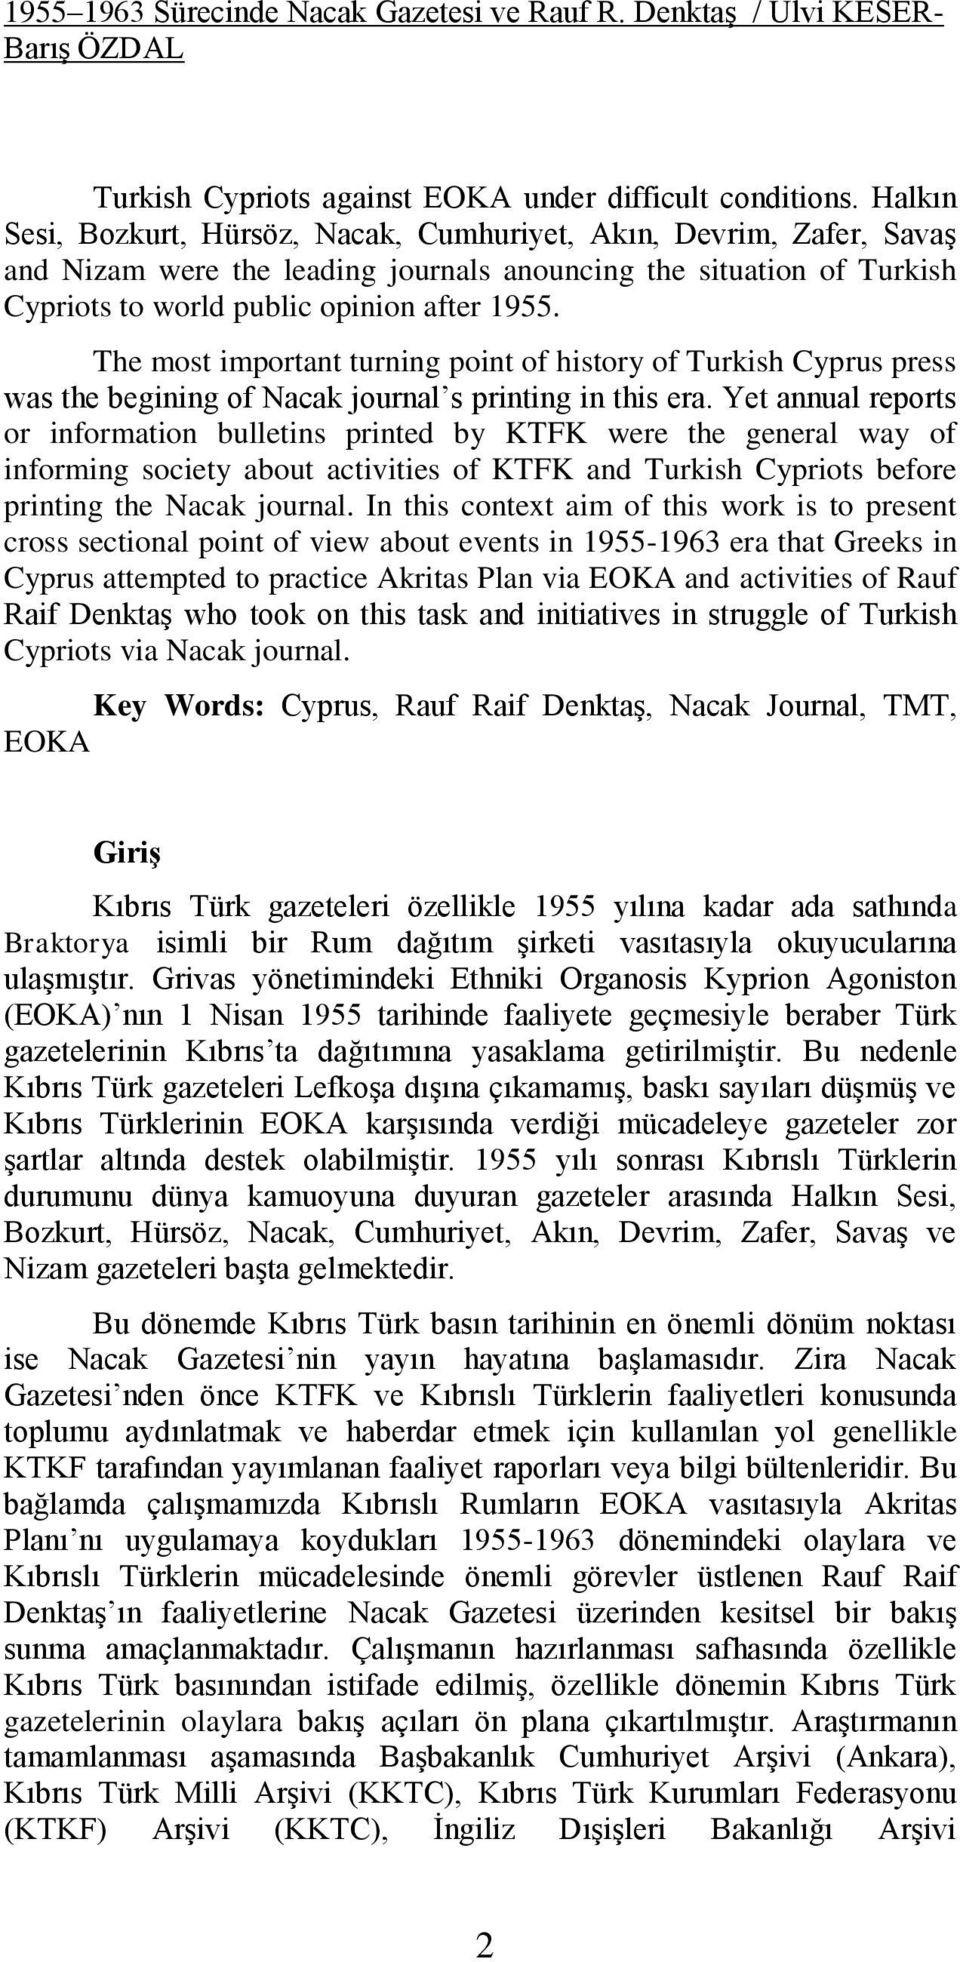 The most important turning point of history of Turkish Cyprus press was the begining of Nacak journal s printing in this era.